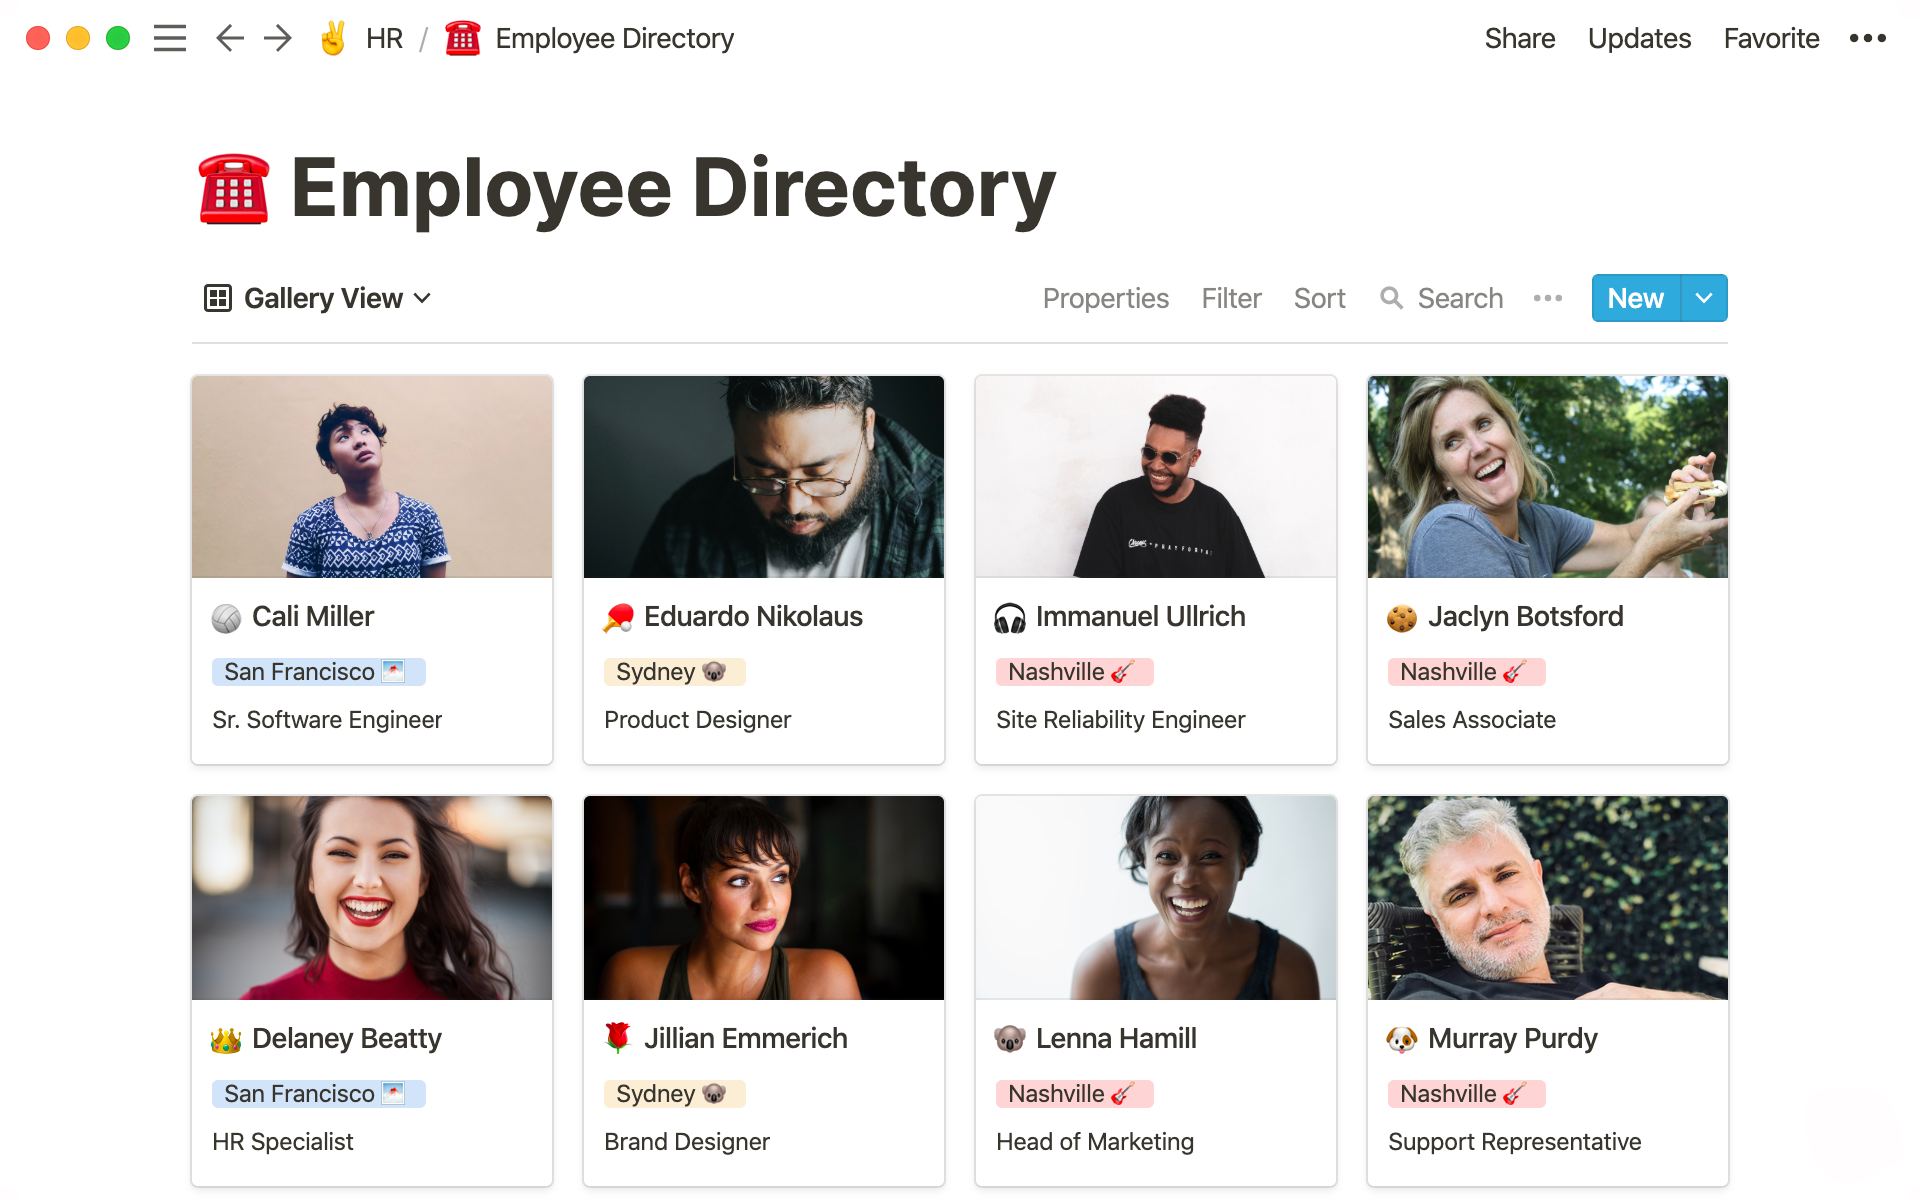 An employee directory helps us learn more about our co-workers.